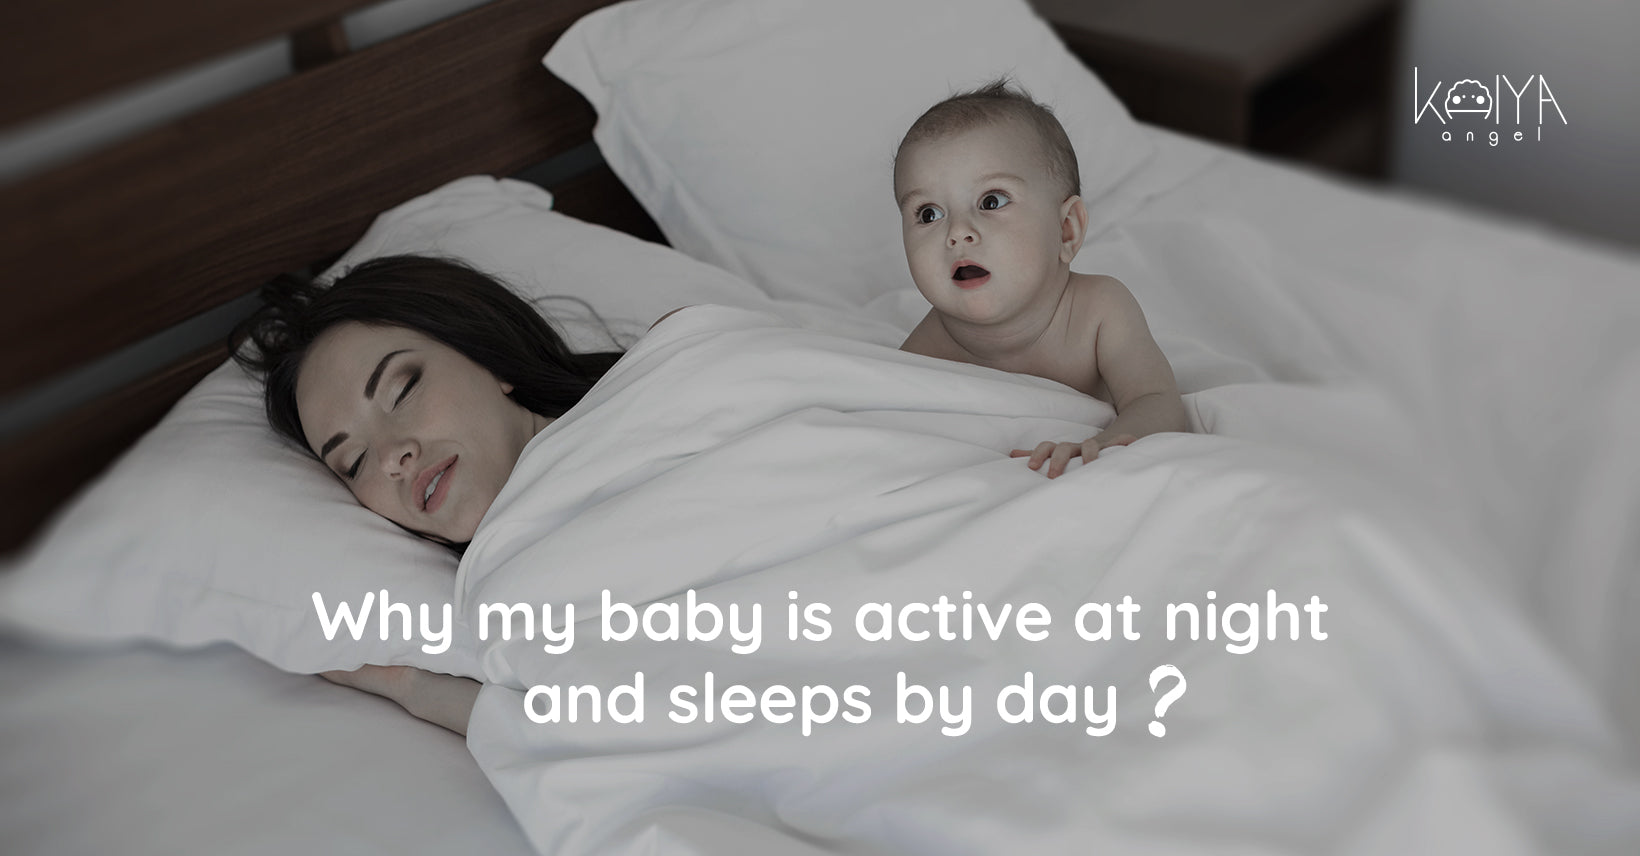 Why my baby is active at night and sleeps by day?